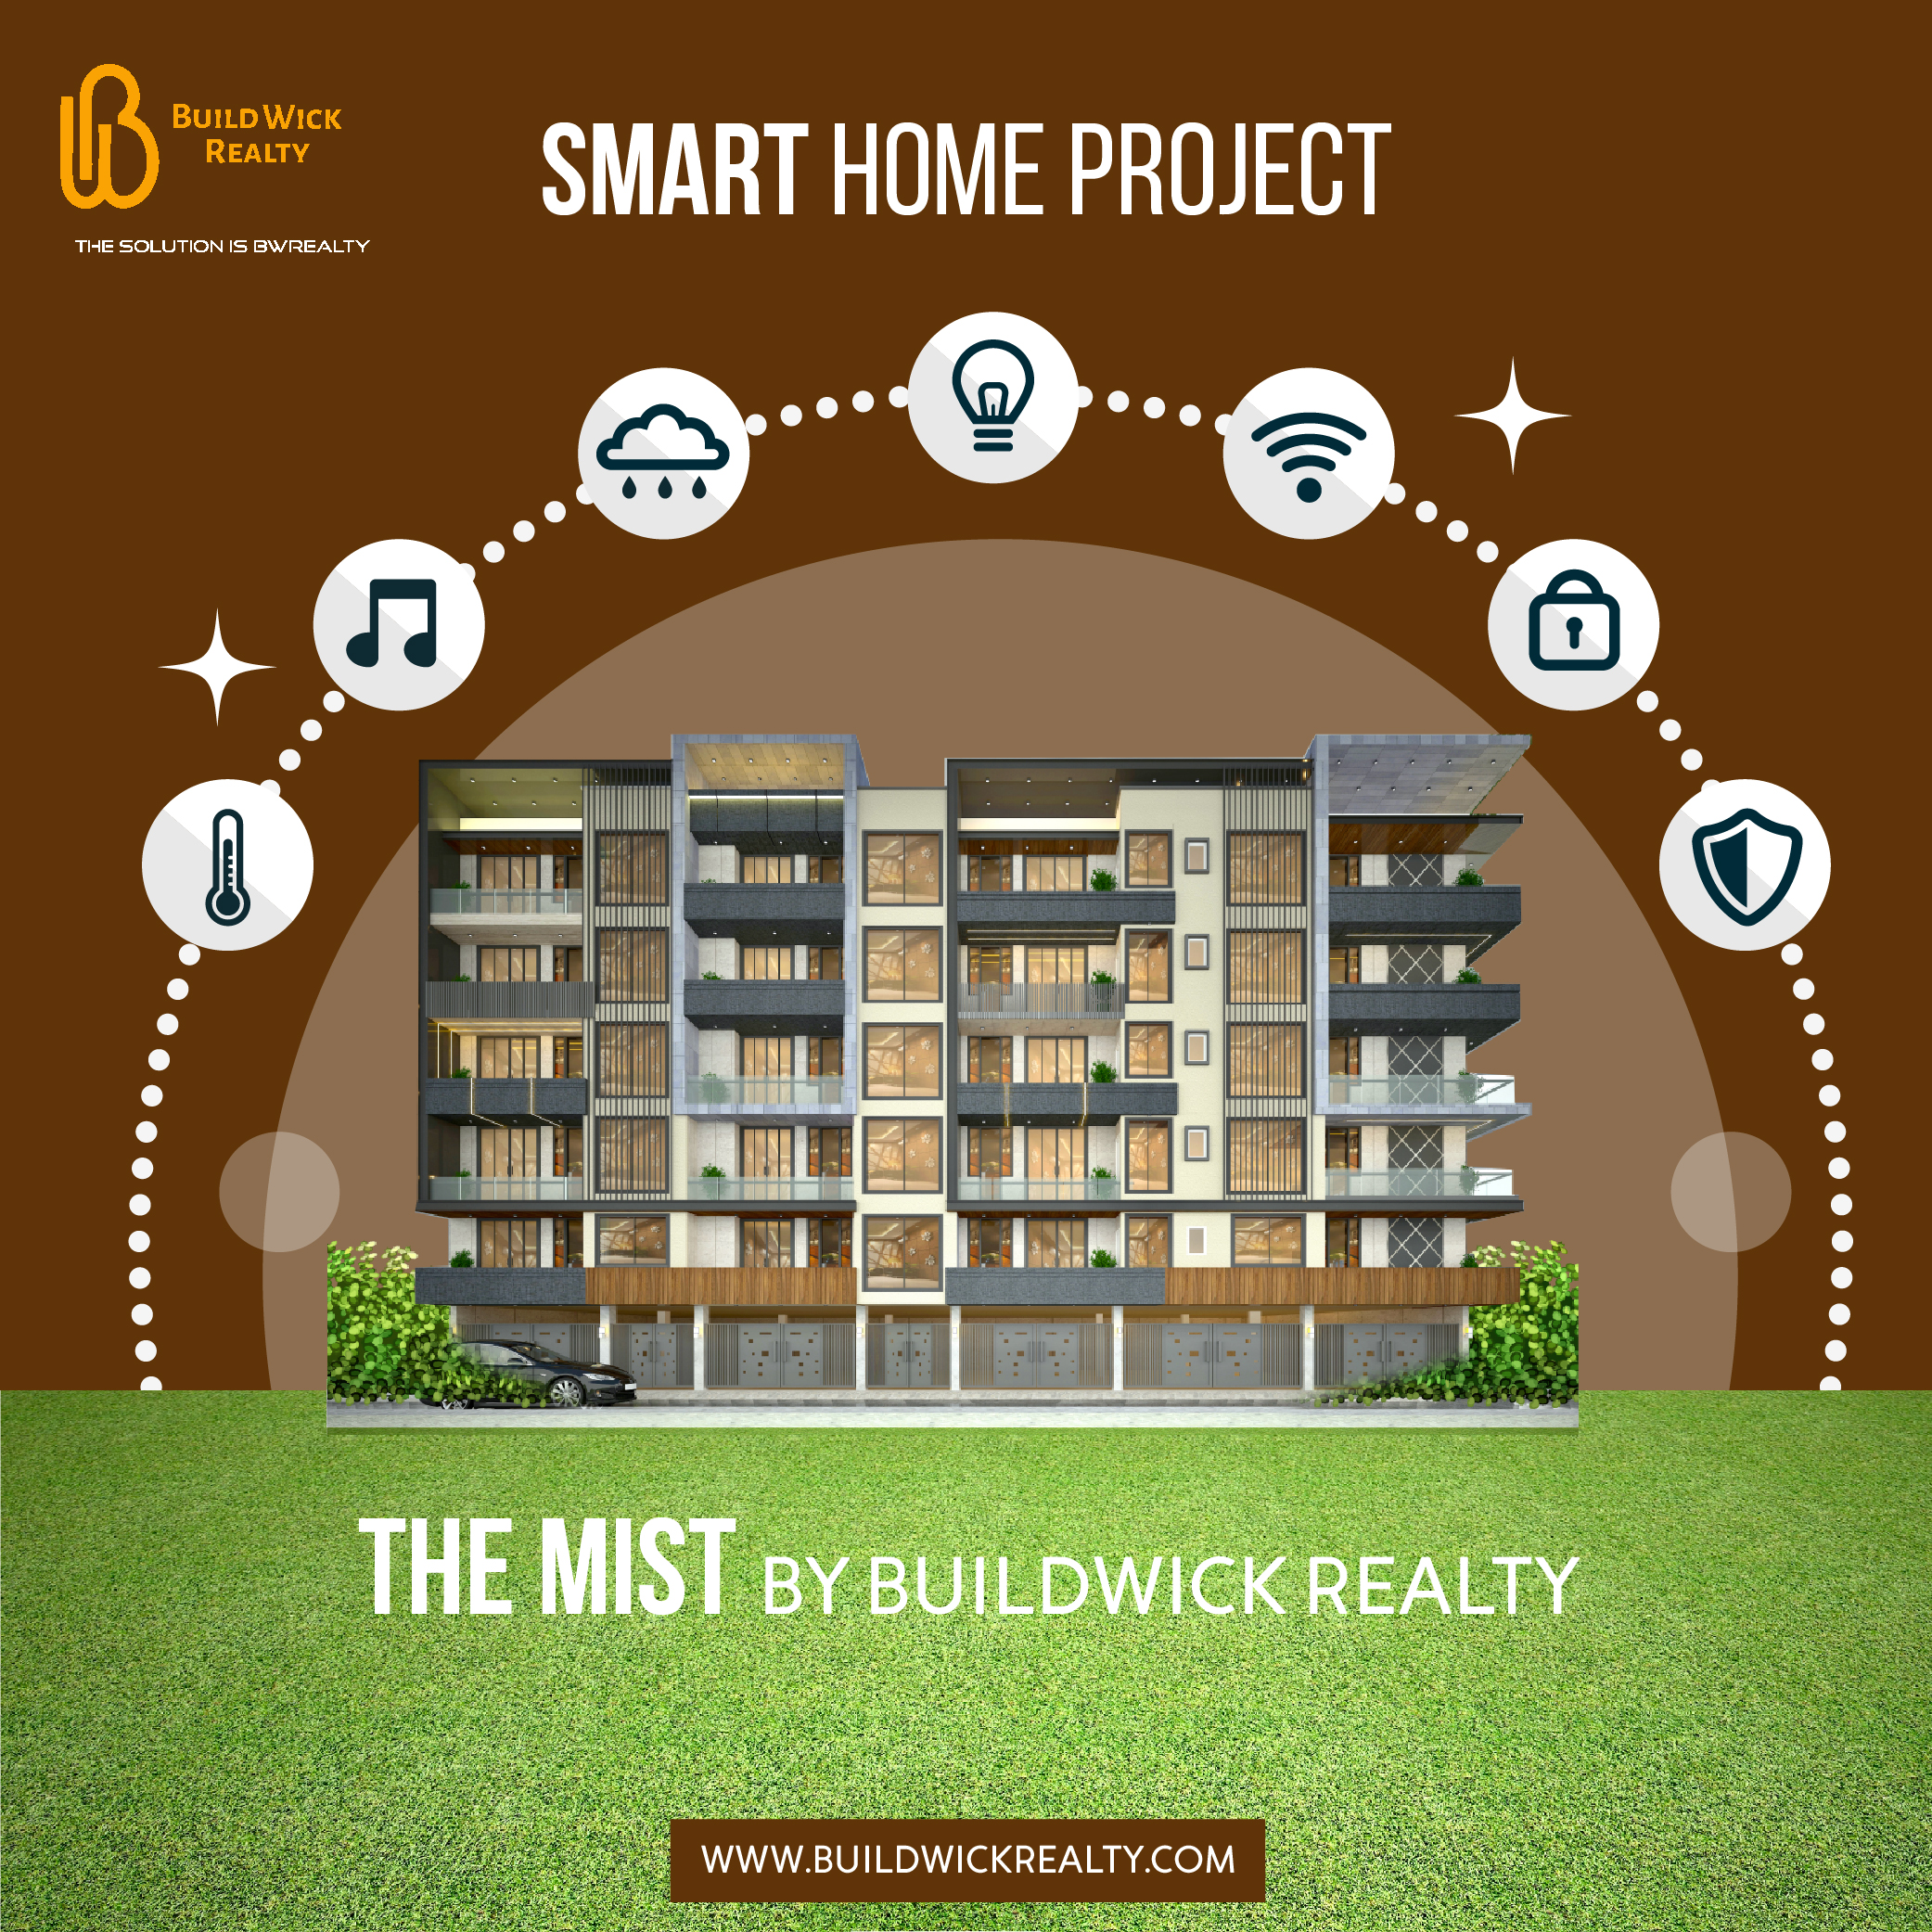 BuiLb Wick

=~ SMART HOME PROJECT

TIHE SOLUTION IS BWREALTY

 

ARE J) i «

WWW.BUILDWICKREALTY.COM

 

HNEE - > D7
ad acoRe CRS NE SBE ae Sr Re ST a